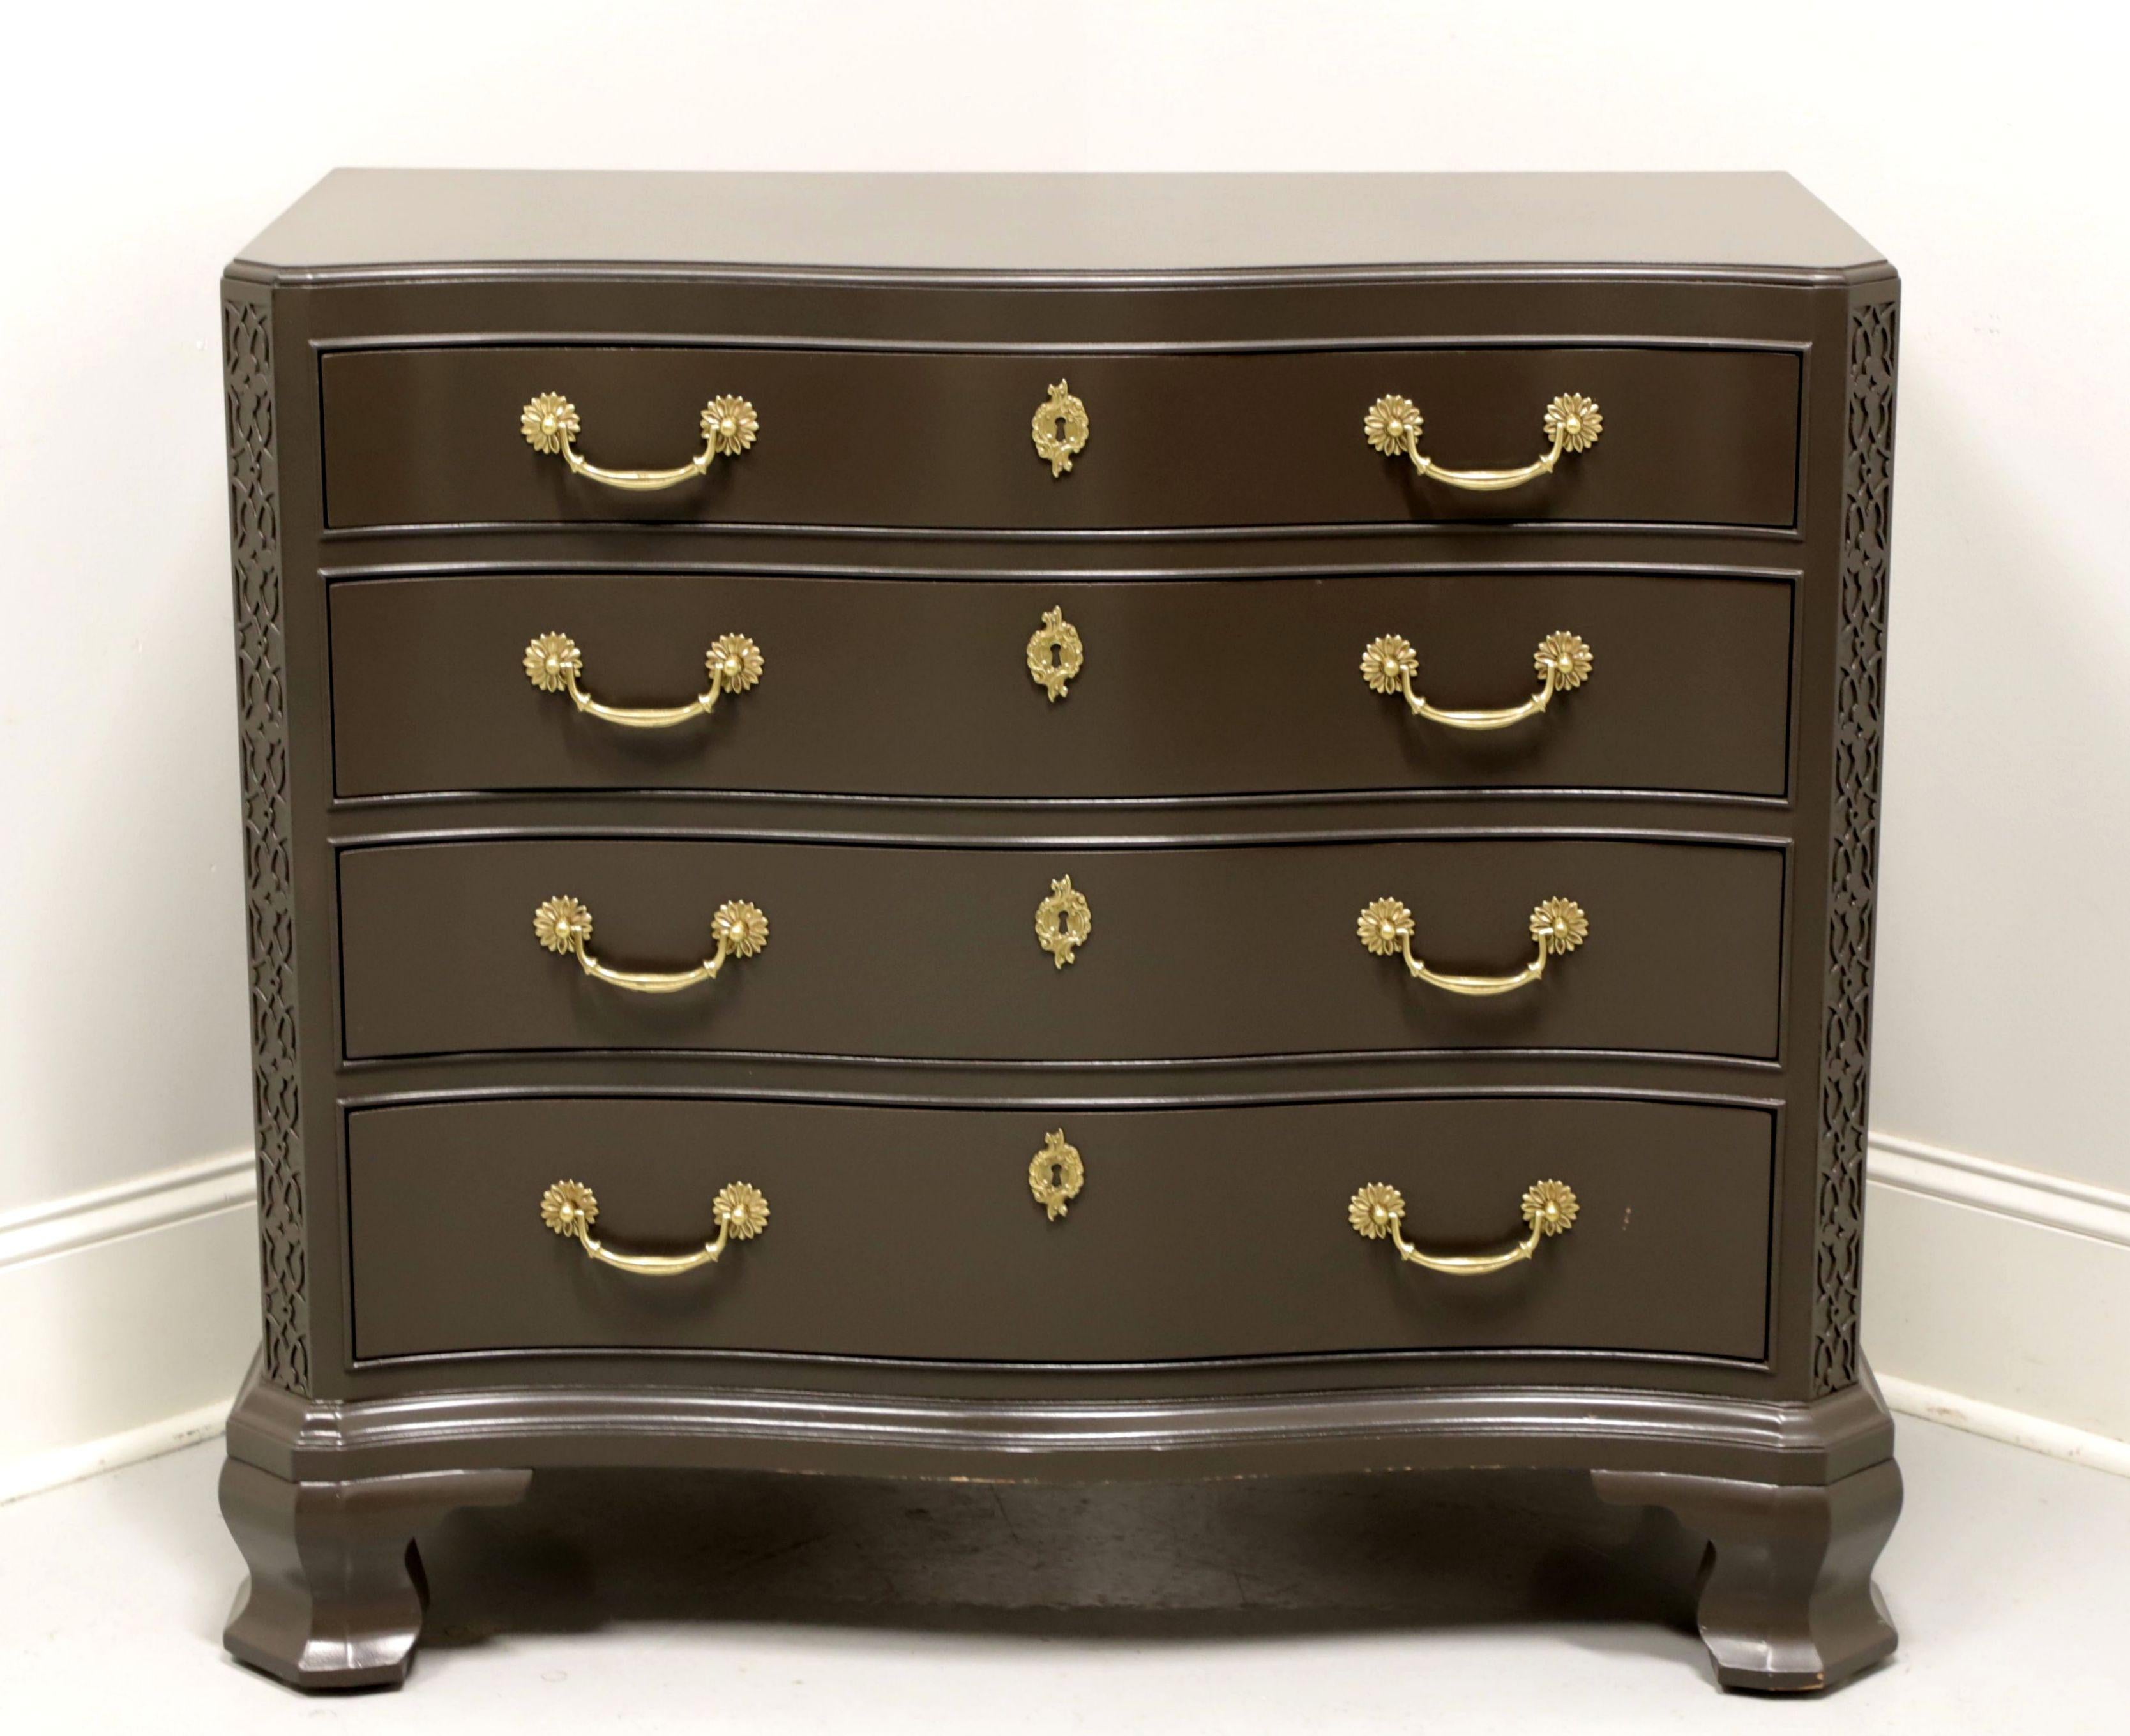 A Chippendale style bachelor chest by White Furniture. Hardwood painted a soft gray color with brass hardware, serpentine front, canted corners with fretwork and ogee bracket feet. Features four various size drawers of dovetail construction with